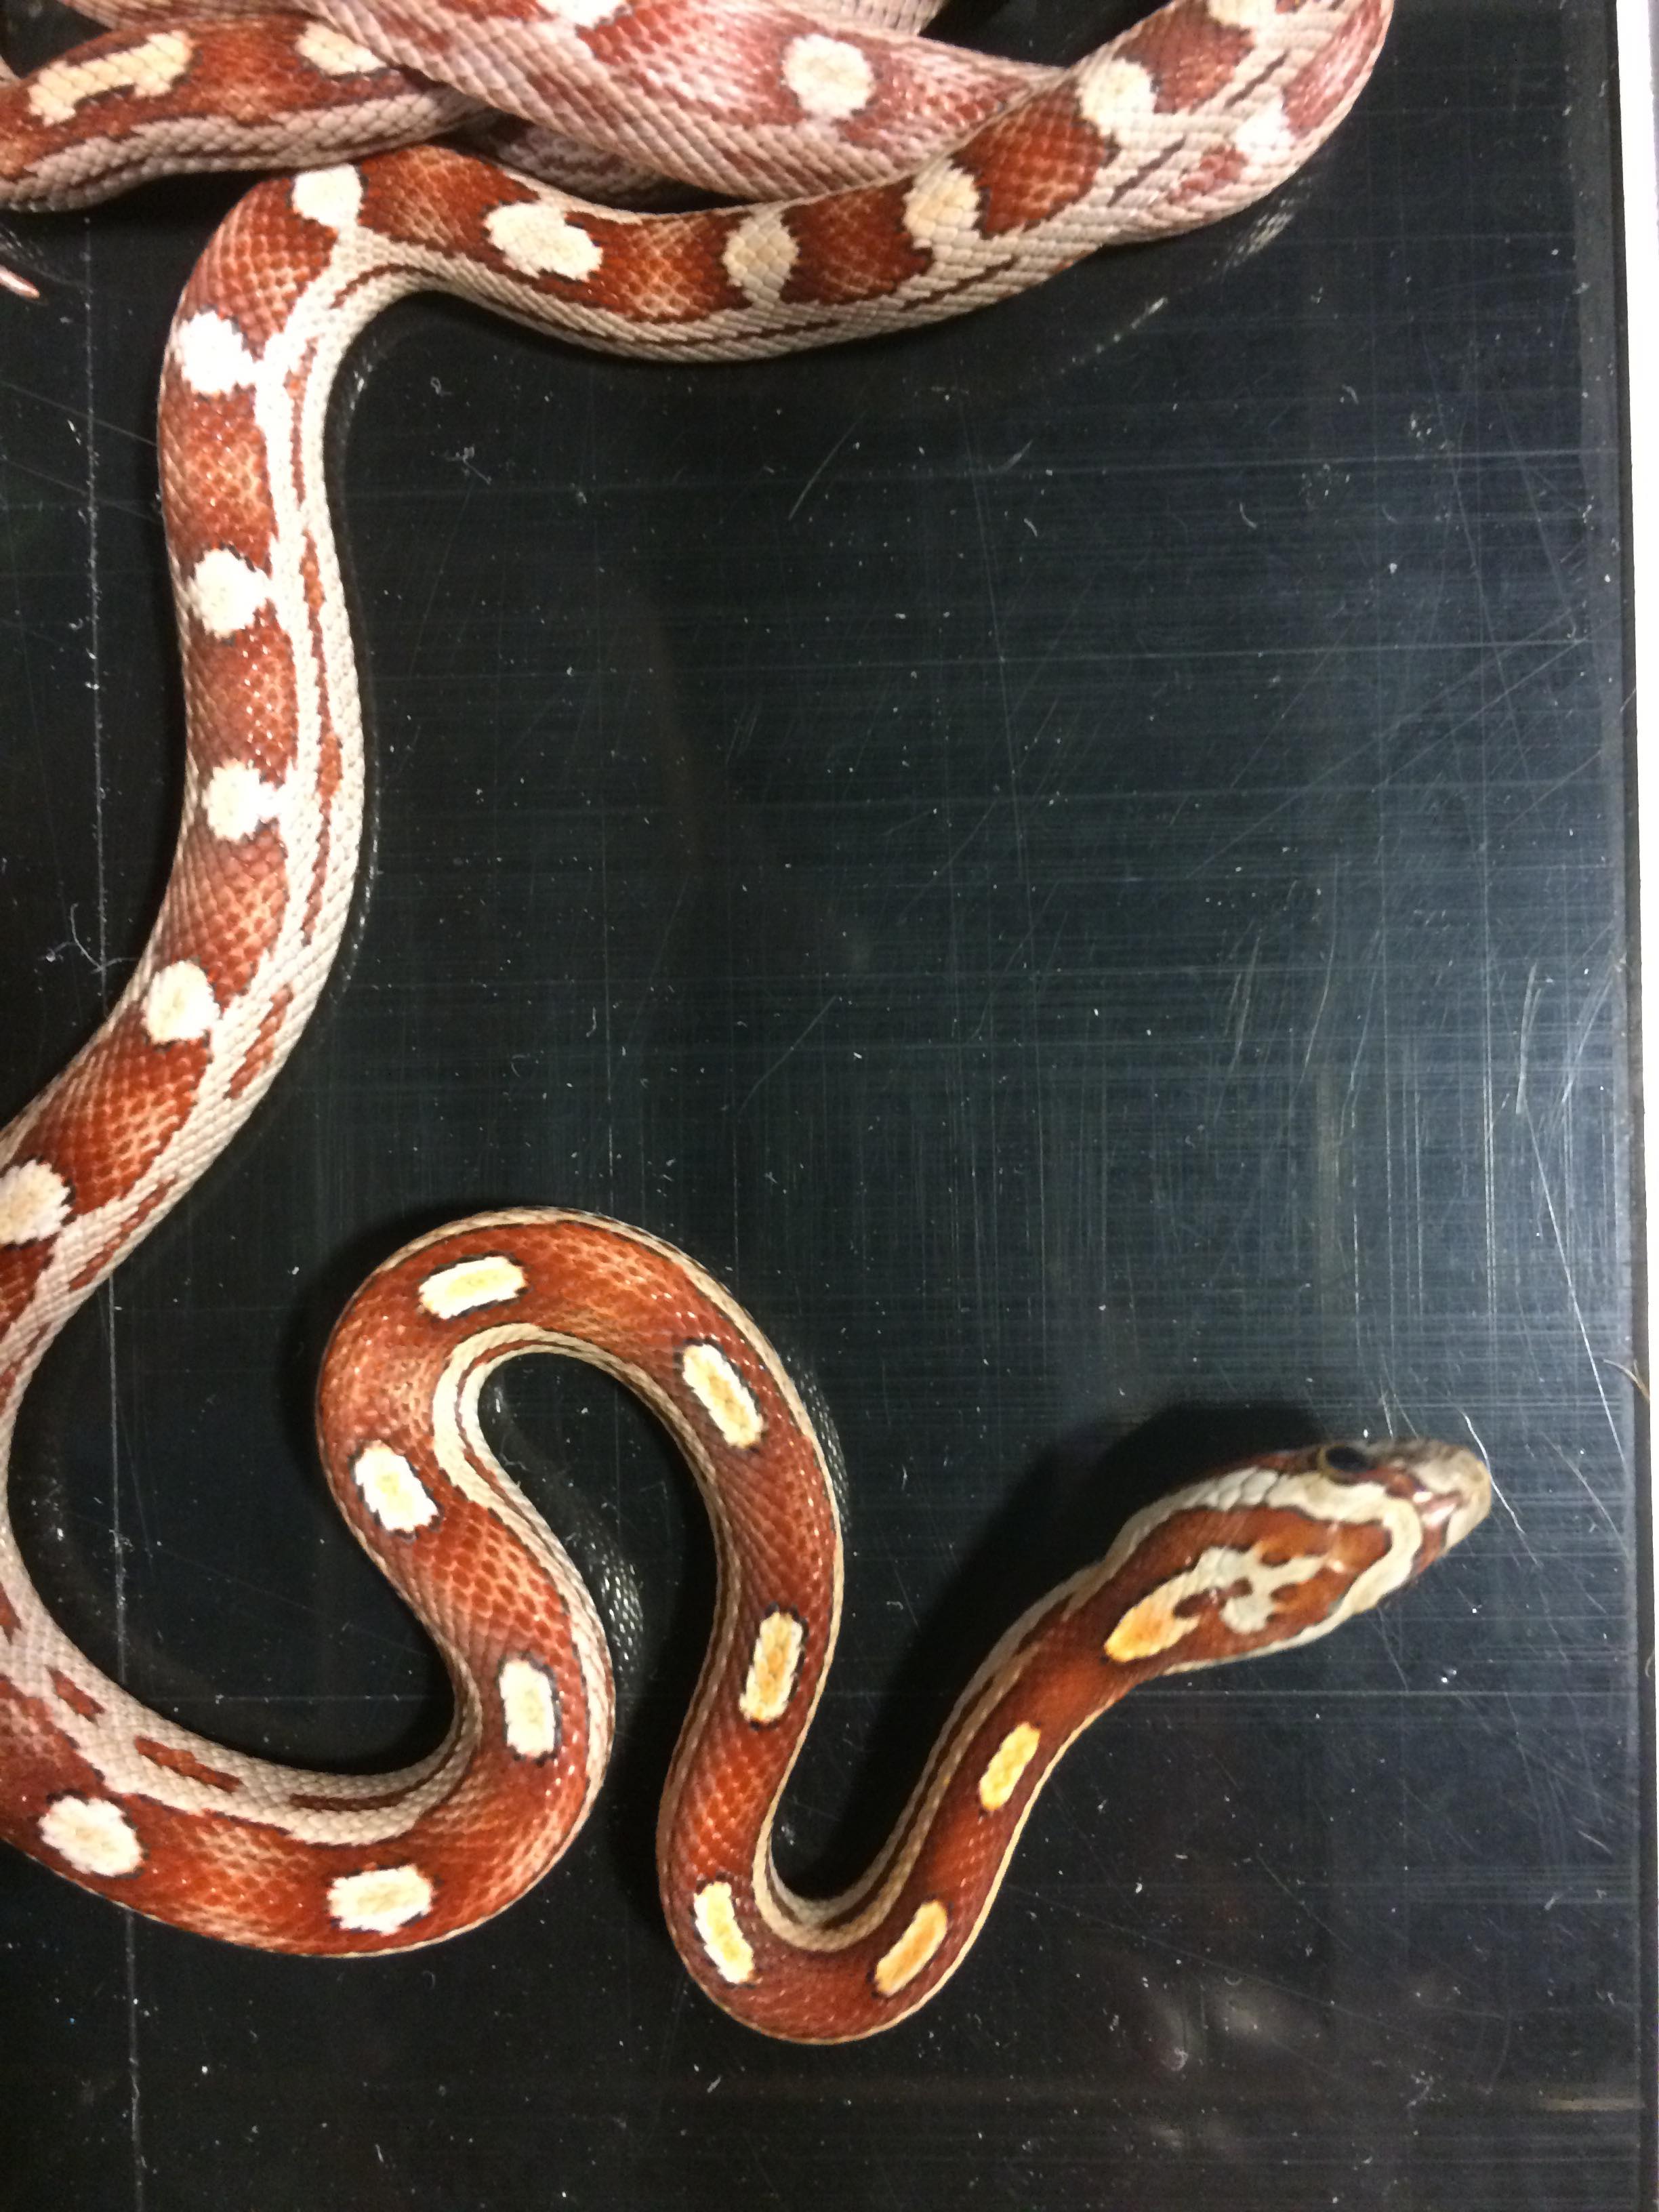 Motley Corn Snake by Adrians Captive Creations